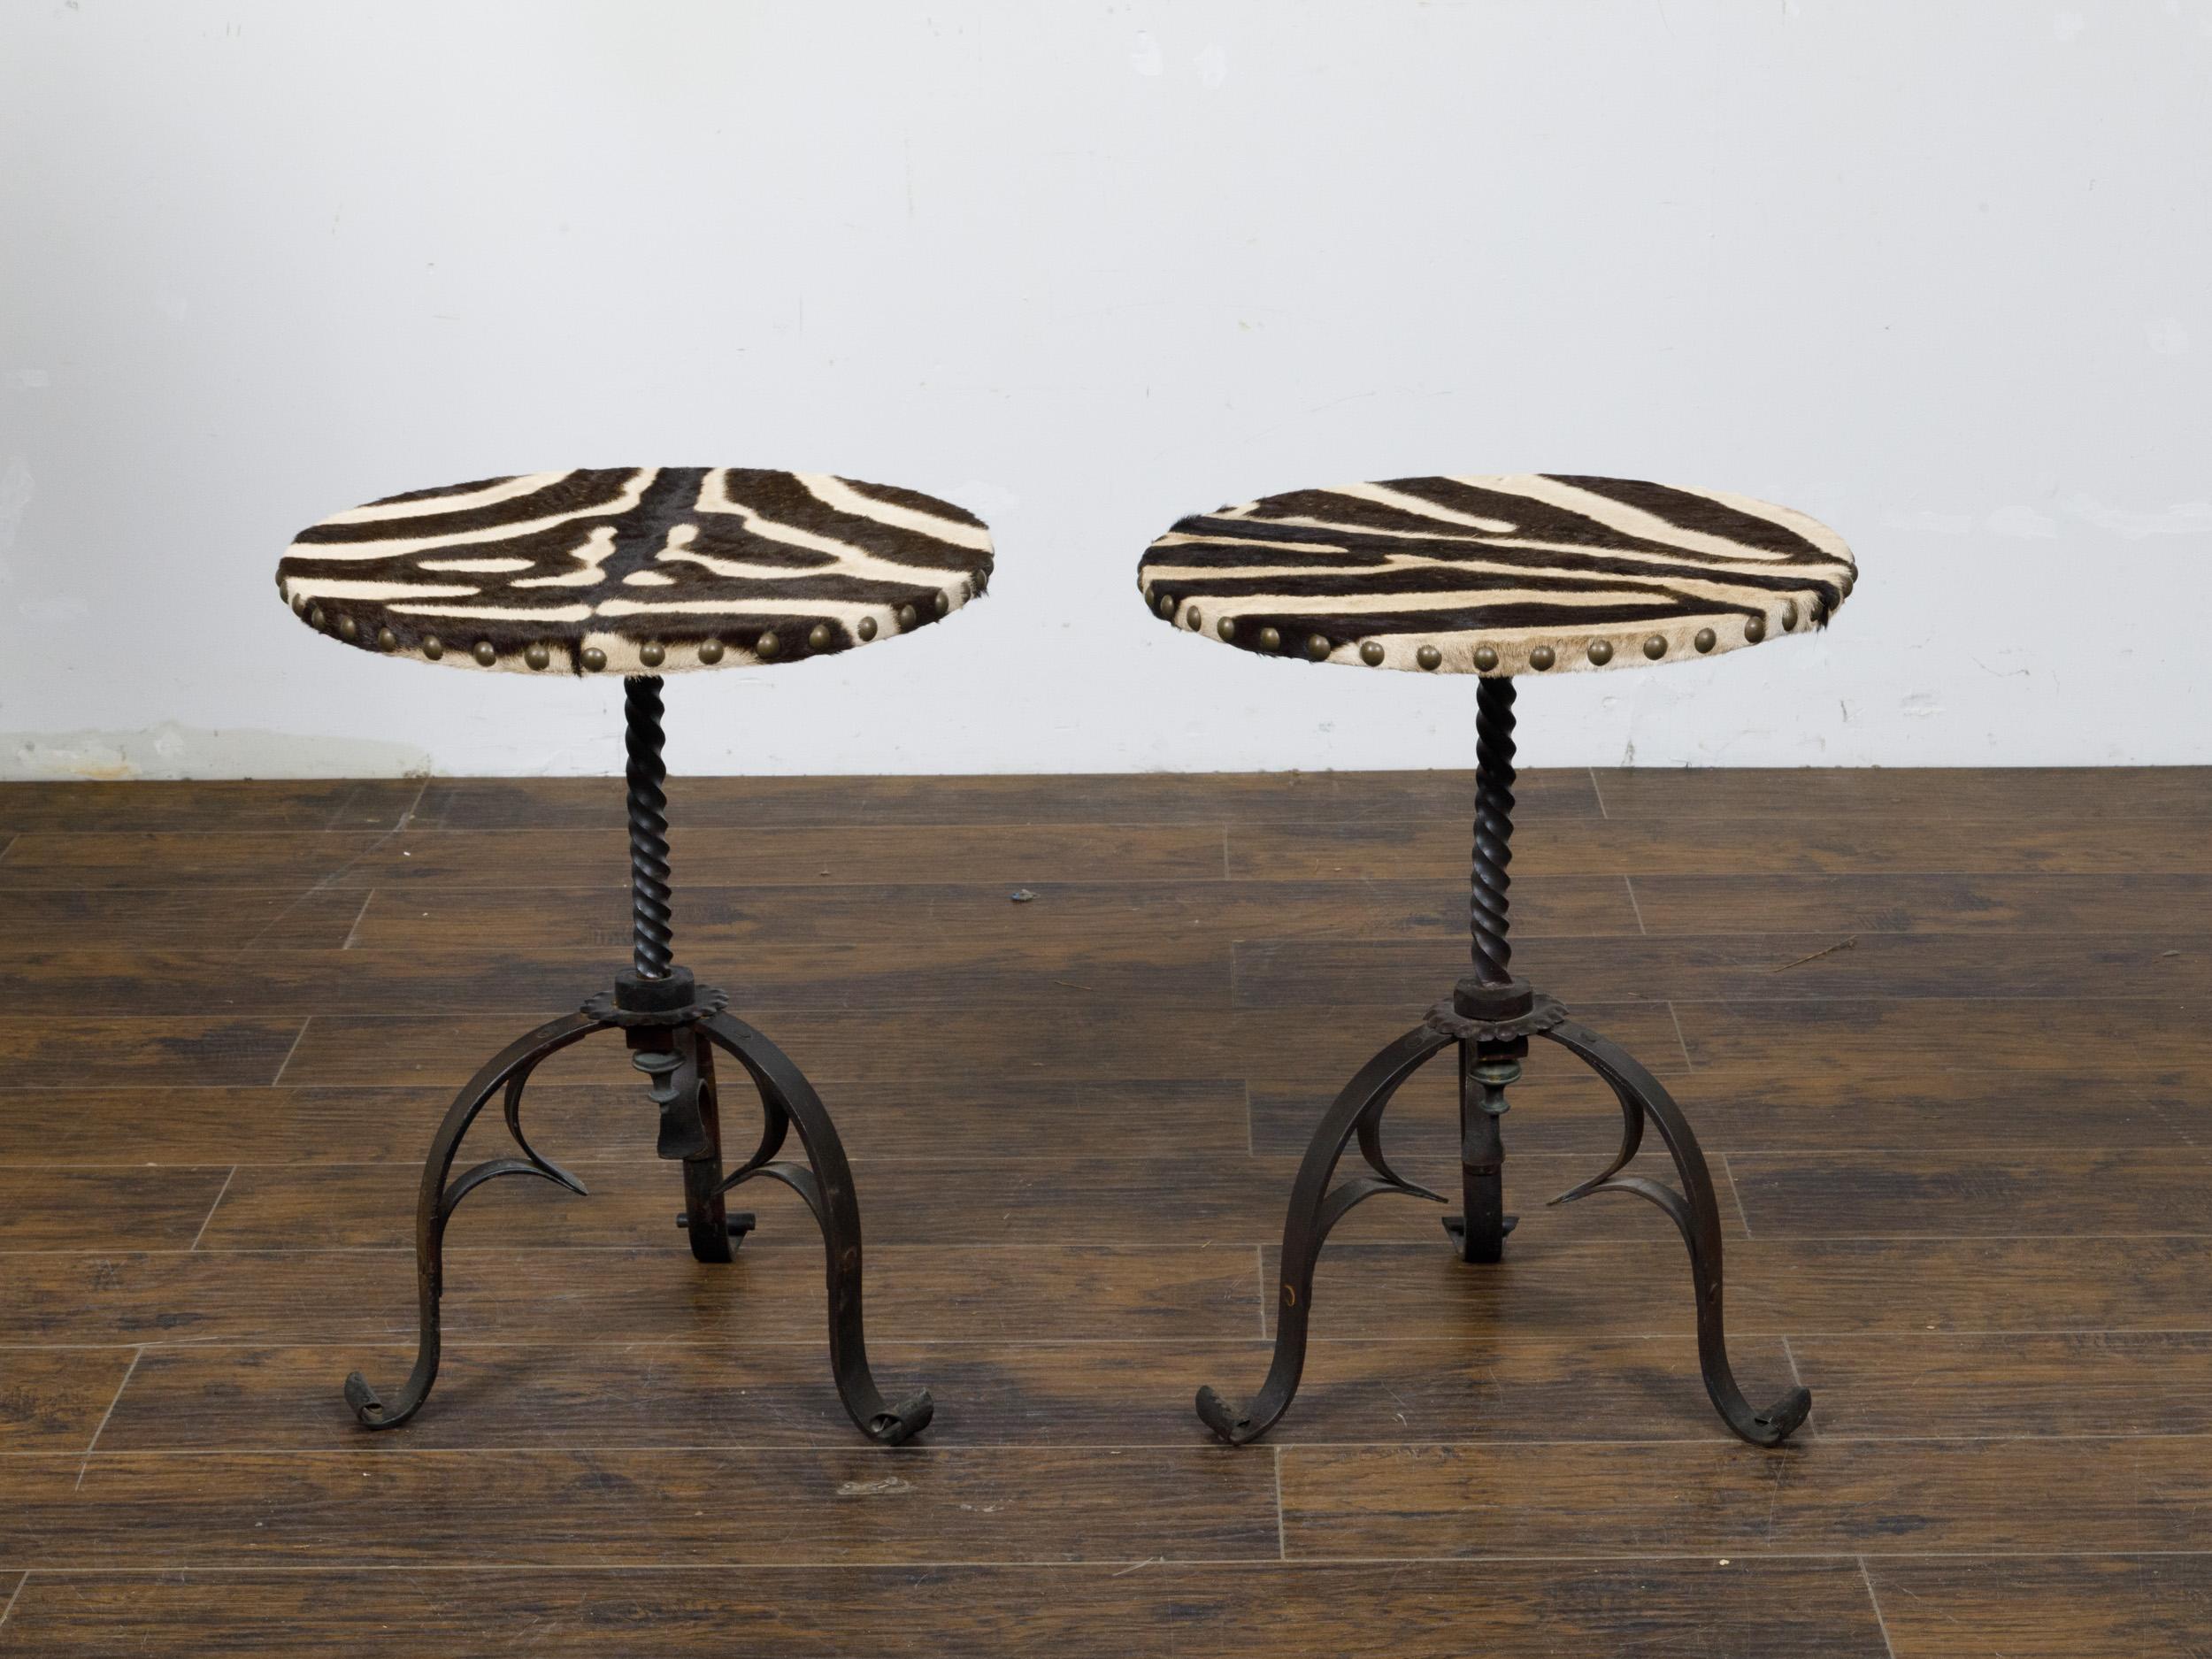 Pair of Midcentury French Guéridon Tables with Zebra Hide and Iron Tripod Bases For Sale 6